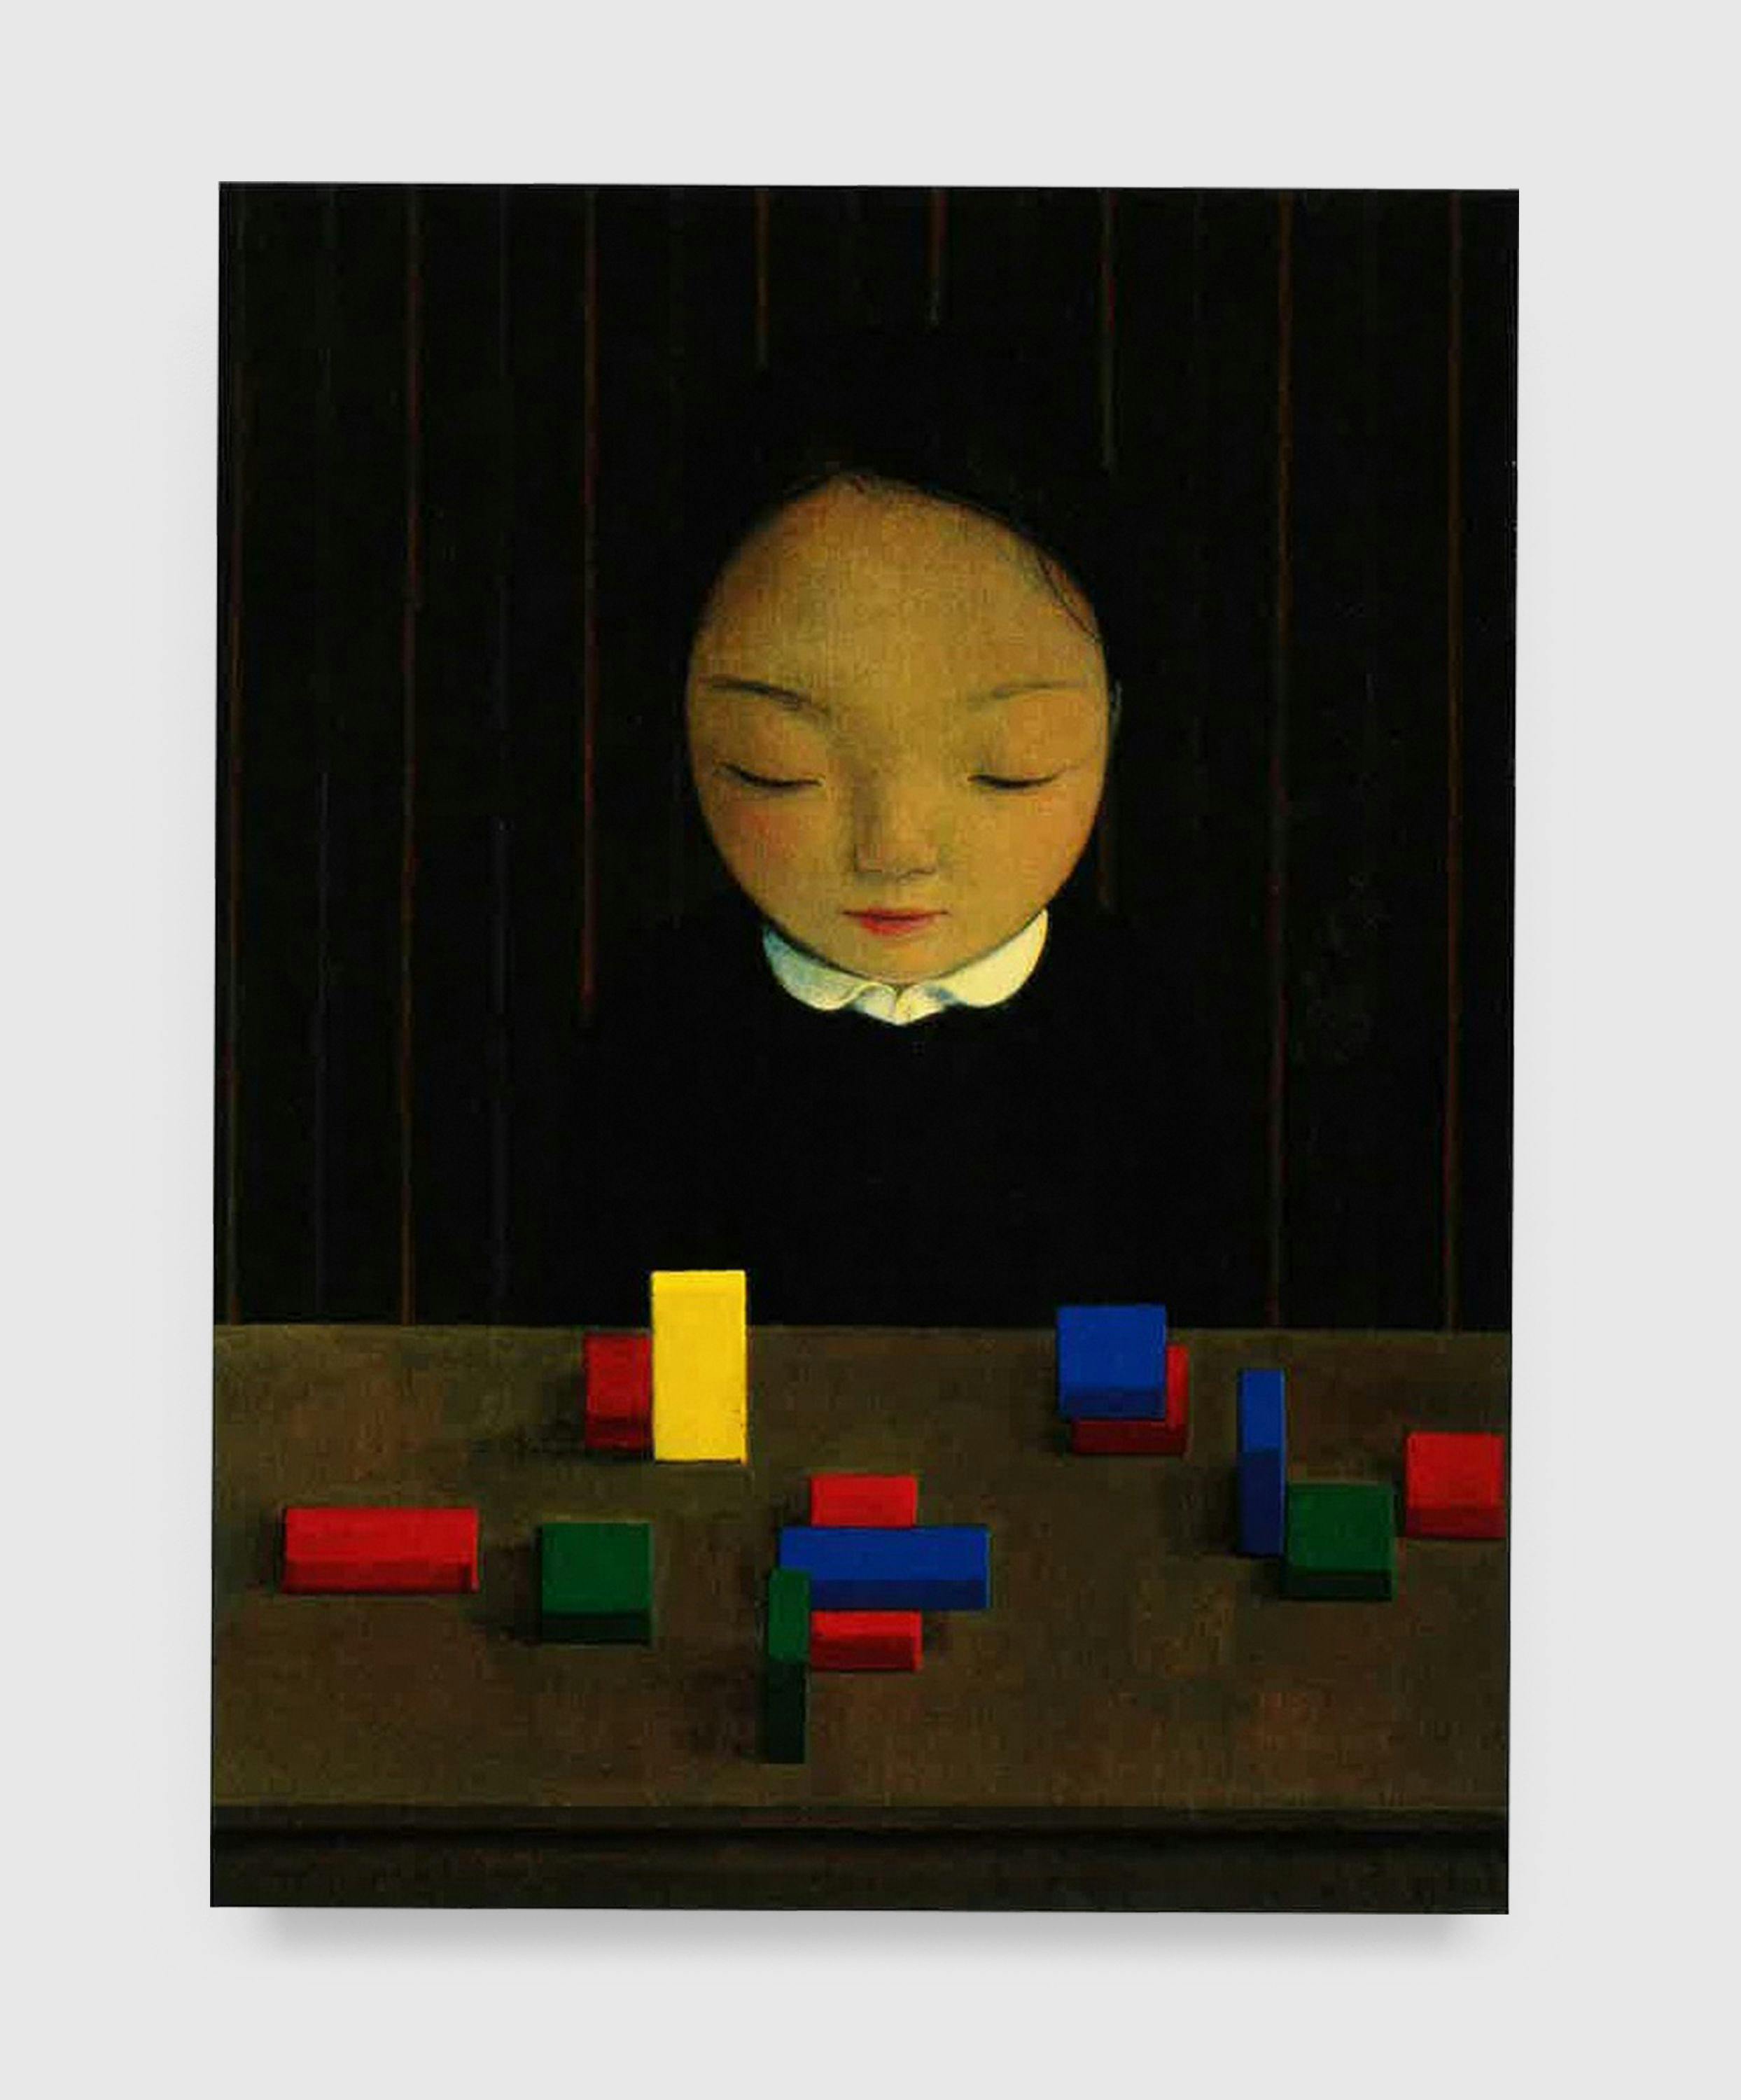 A painting by Liu Ye, titled Girl with Toy Bricks, dated 2007.